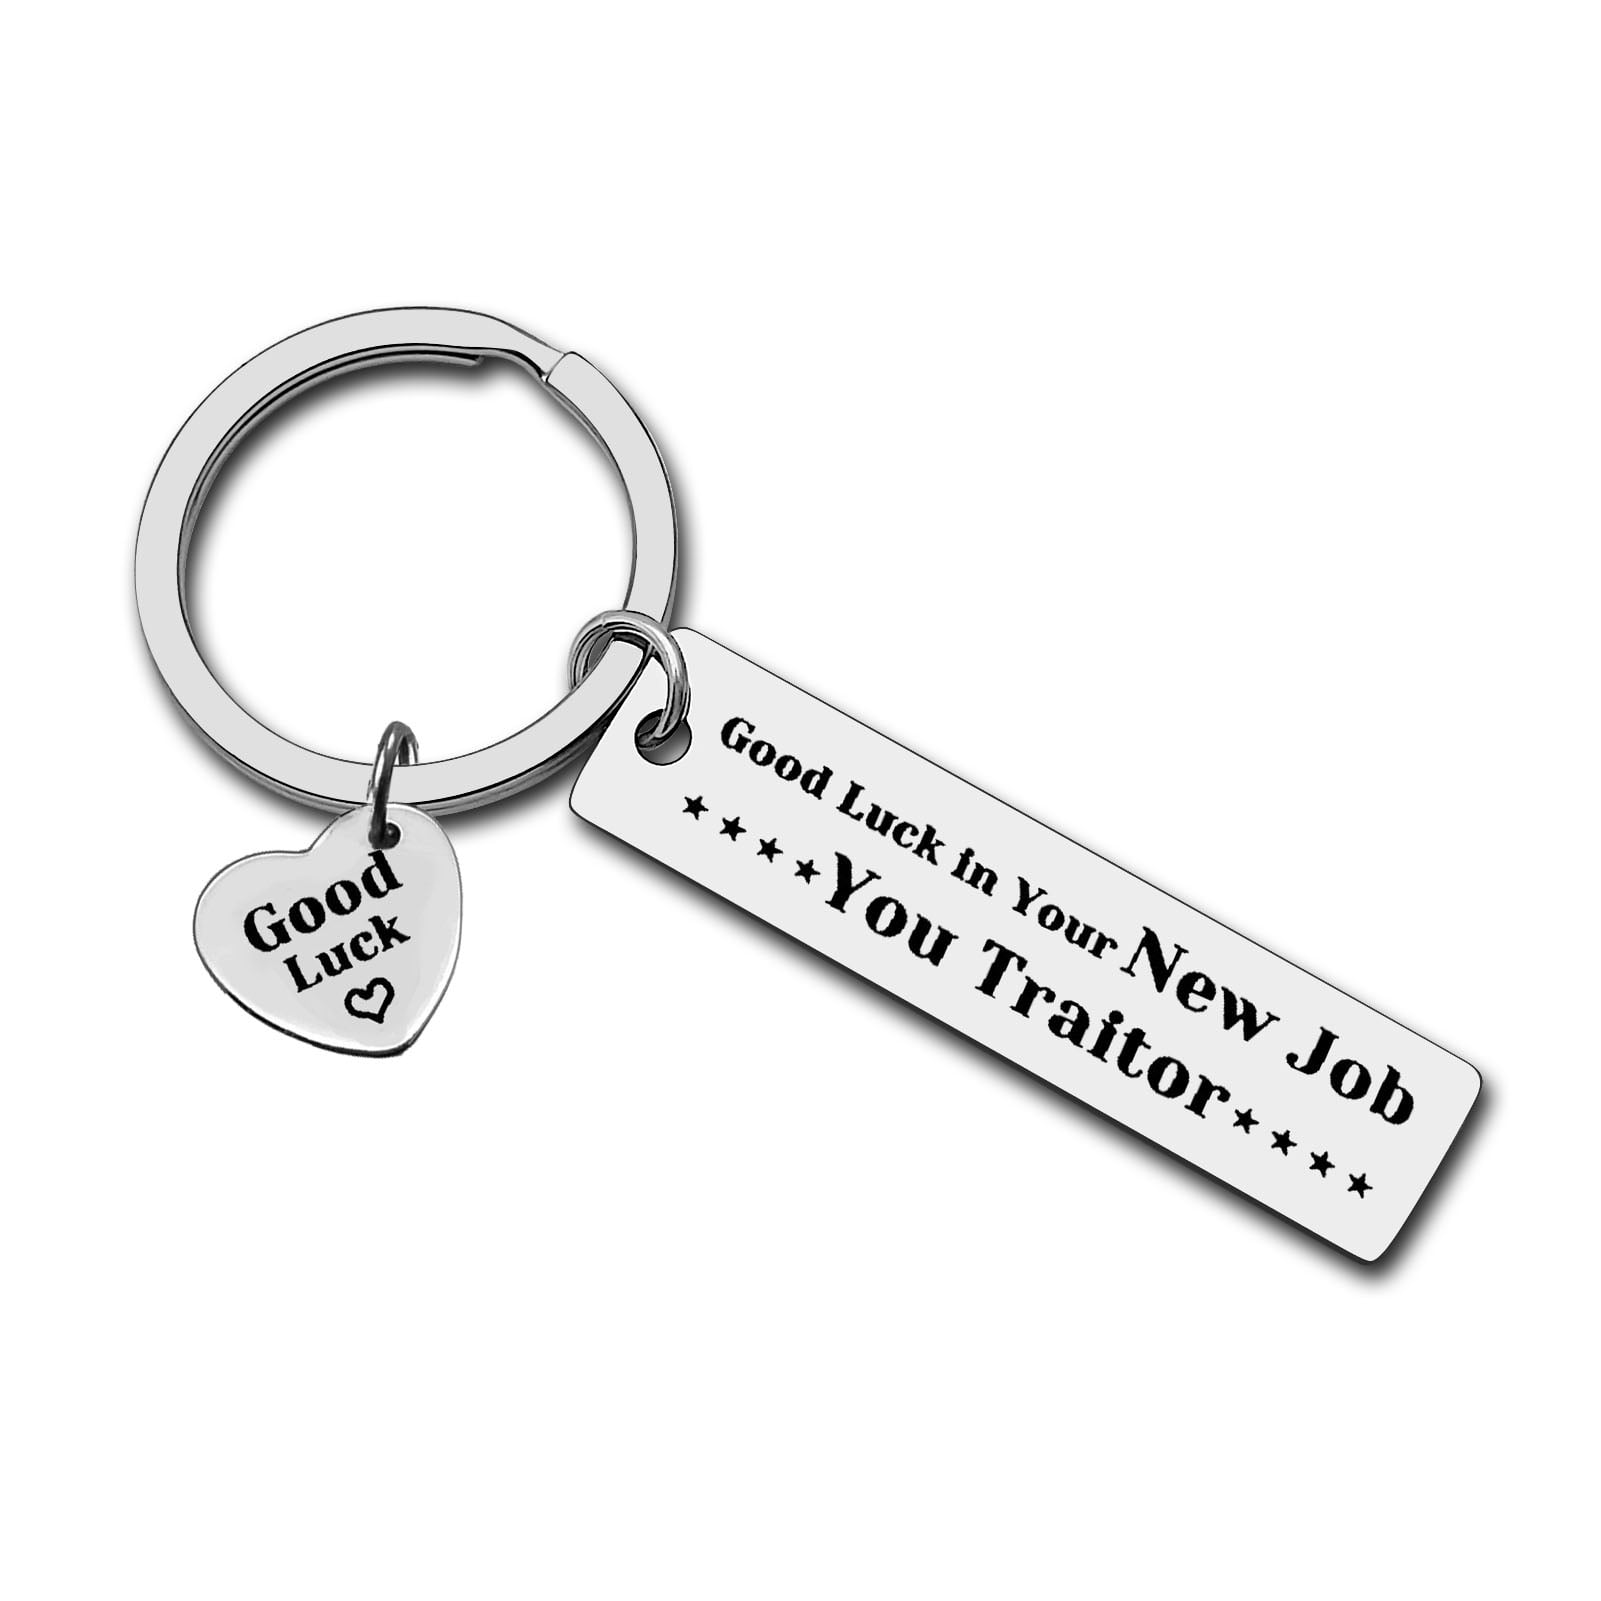 Funny Coworker Dog Tag Keychain Leaving Gift Key Chain Best Friend Friendship 